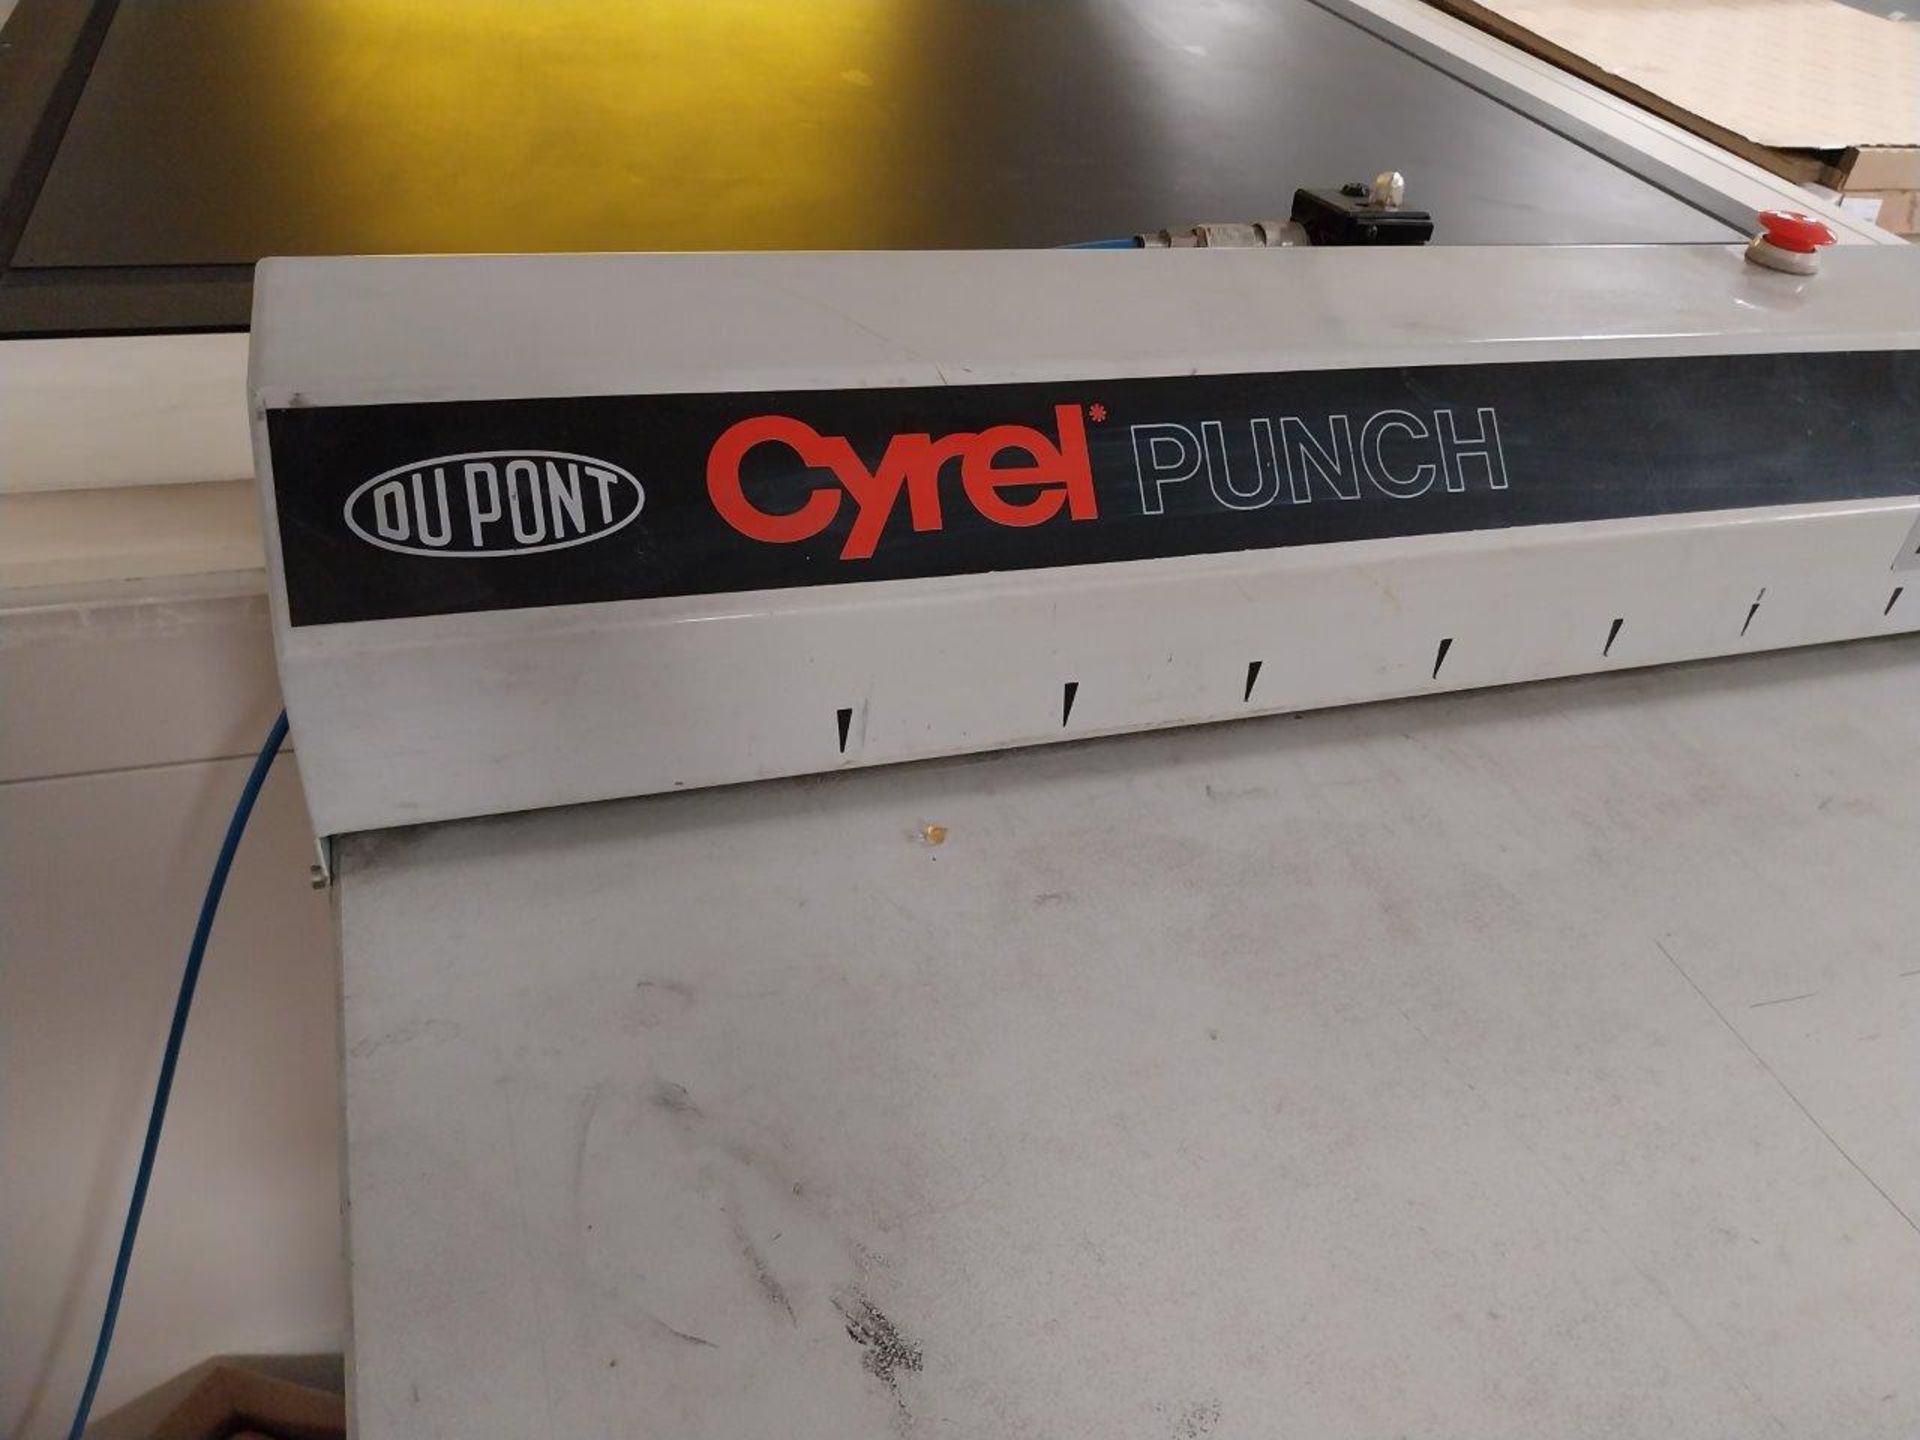 Dupont Cyrel punch Serial number 896, Year 12/99, 6 bar, 55” capacity on wooden bench - Image 3 of 4